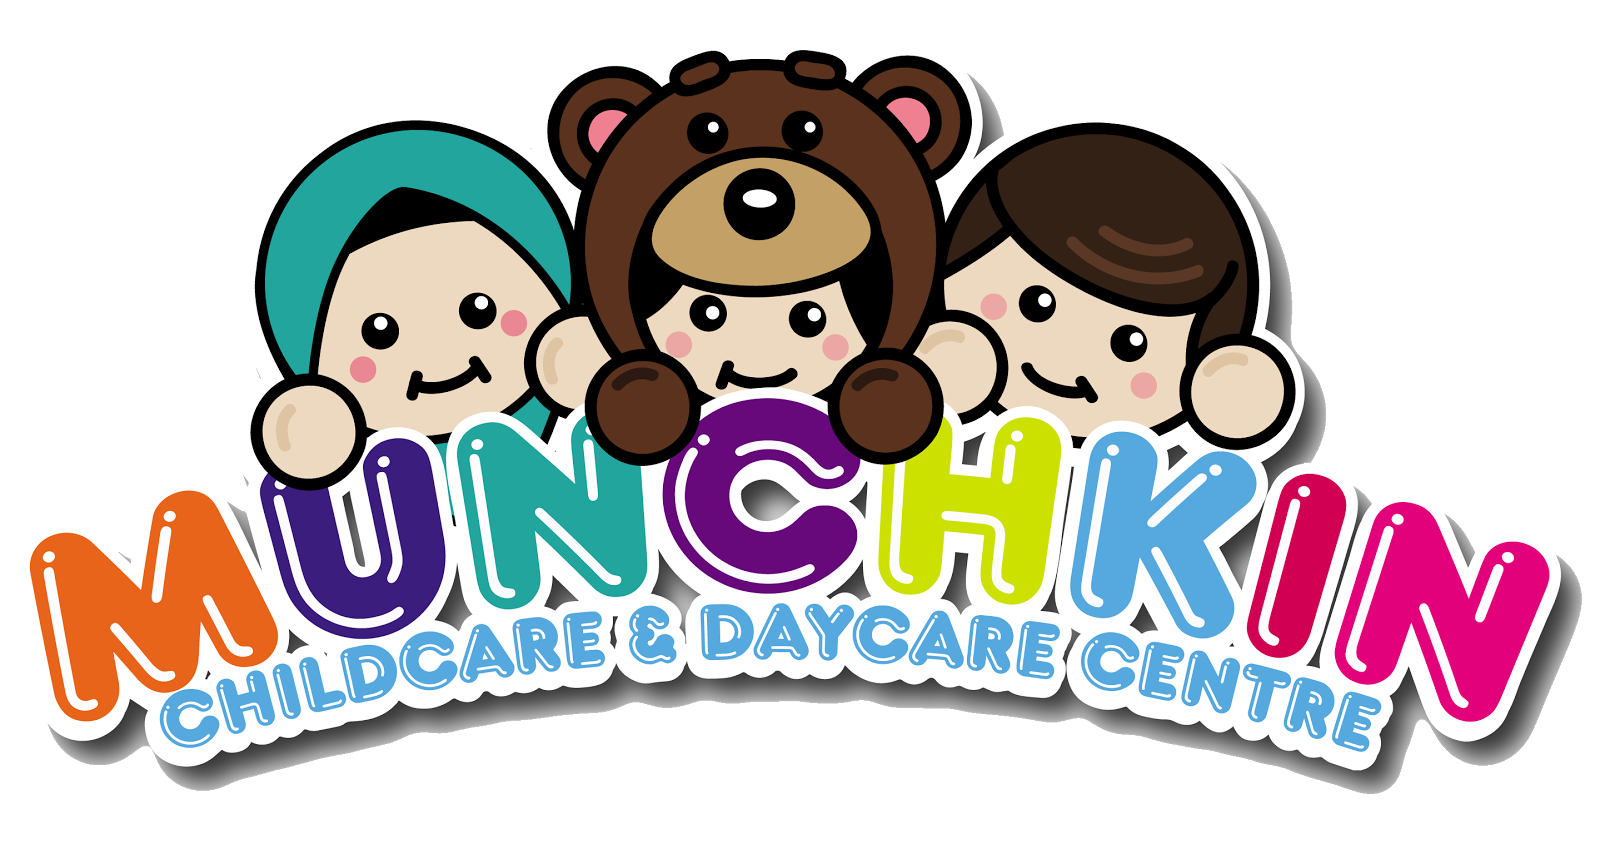 <center>Munchkin Childcare & Daycare Centre</center>